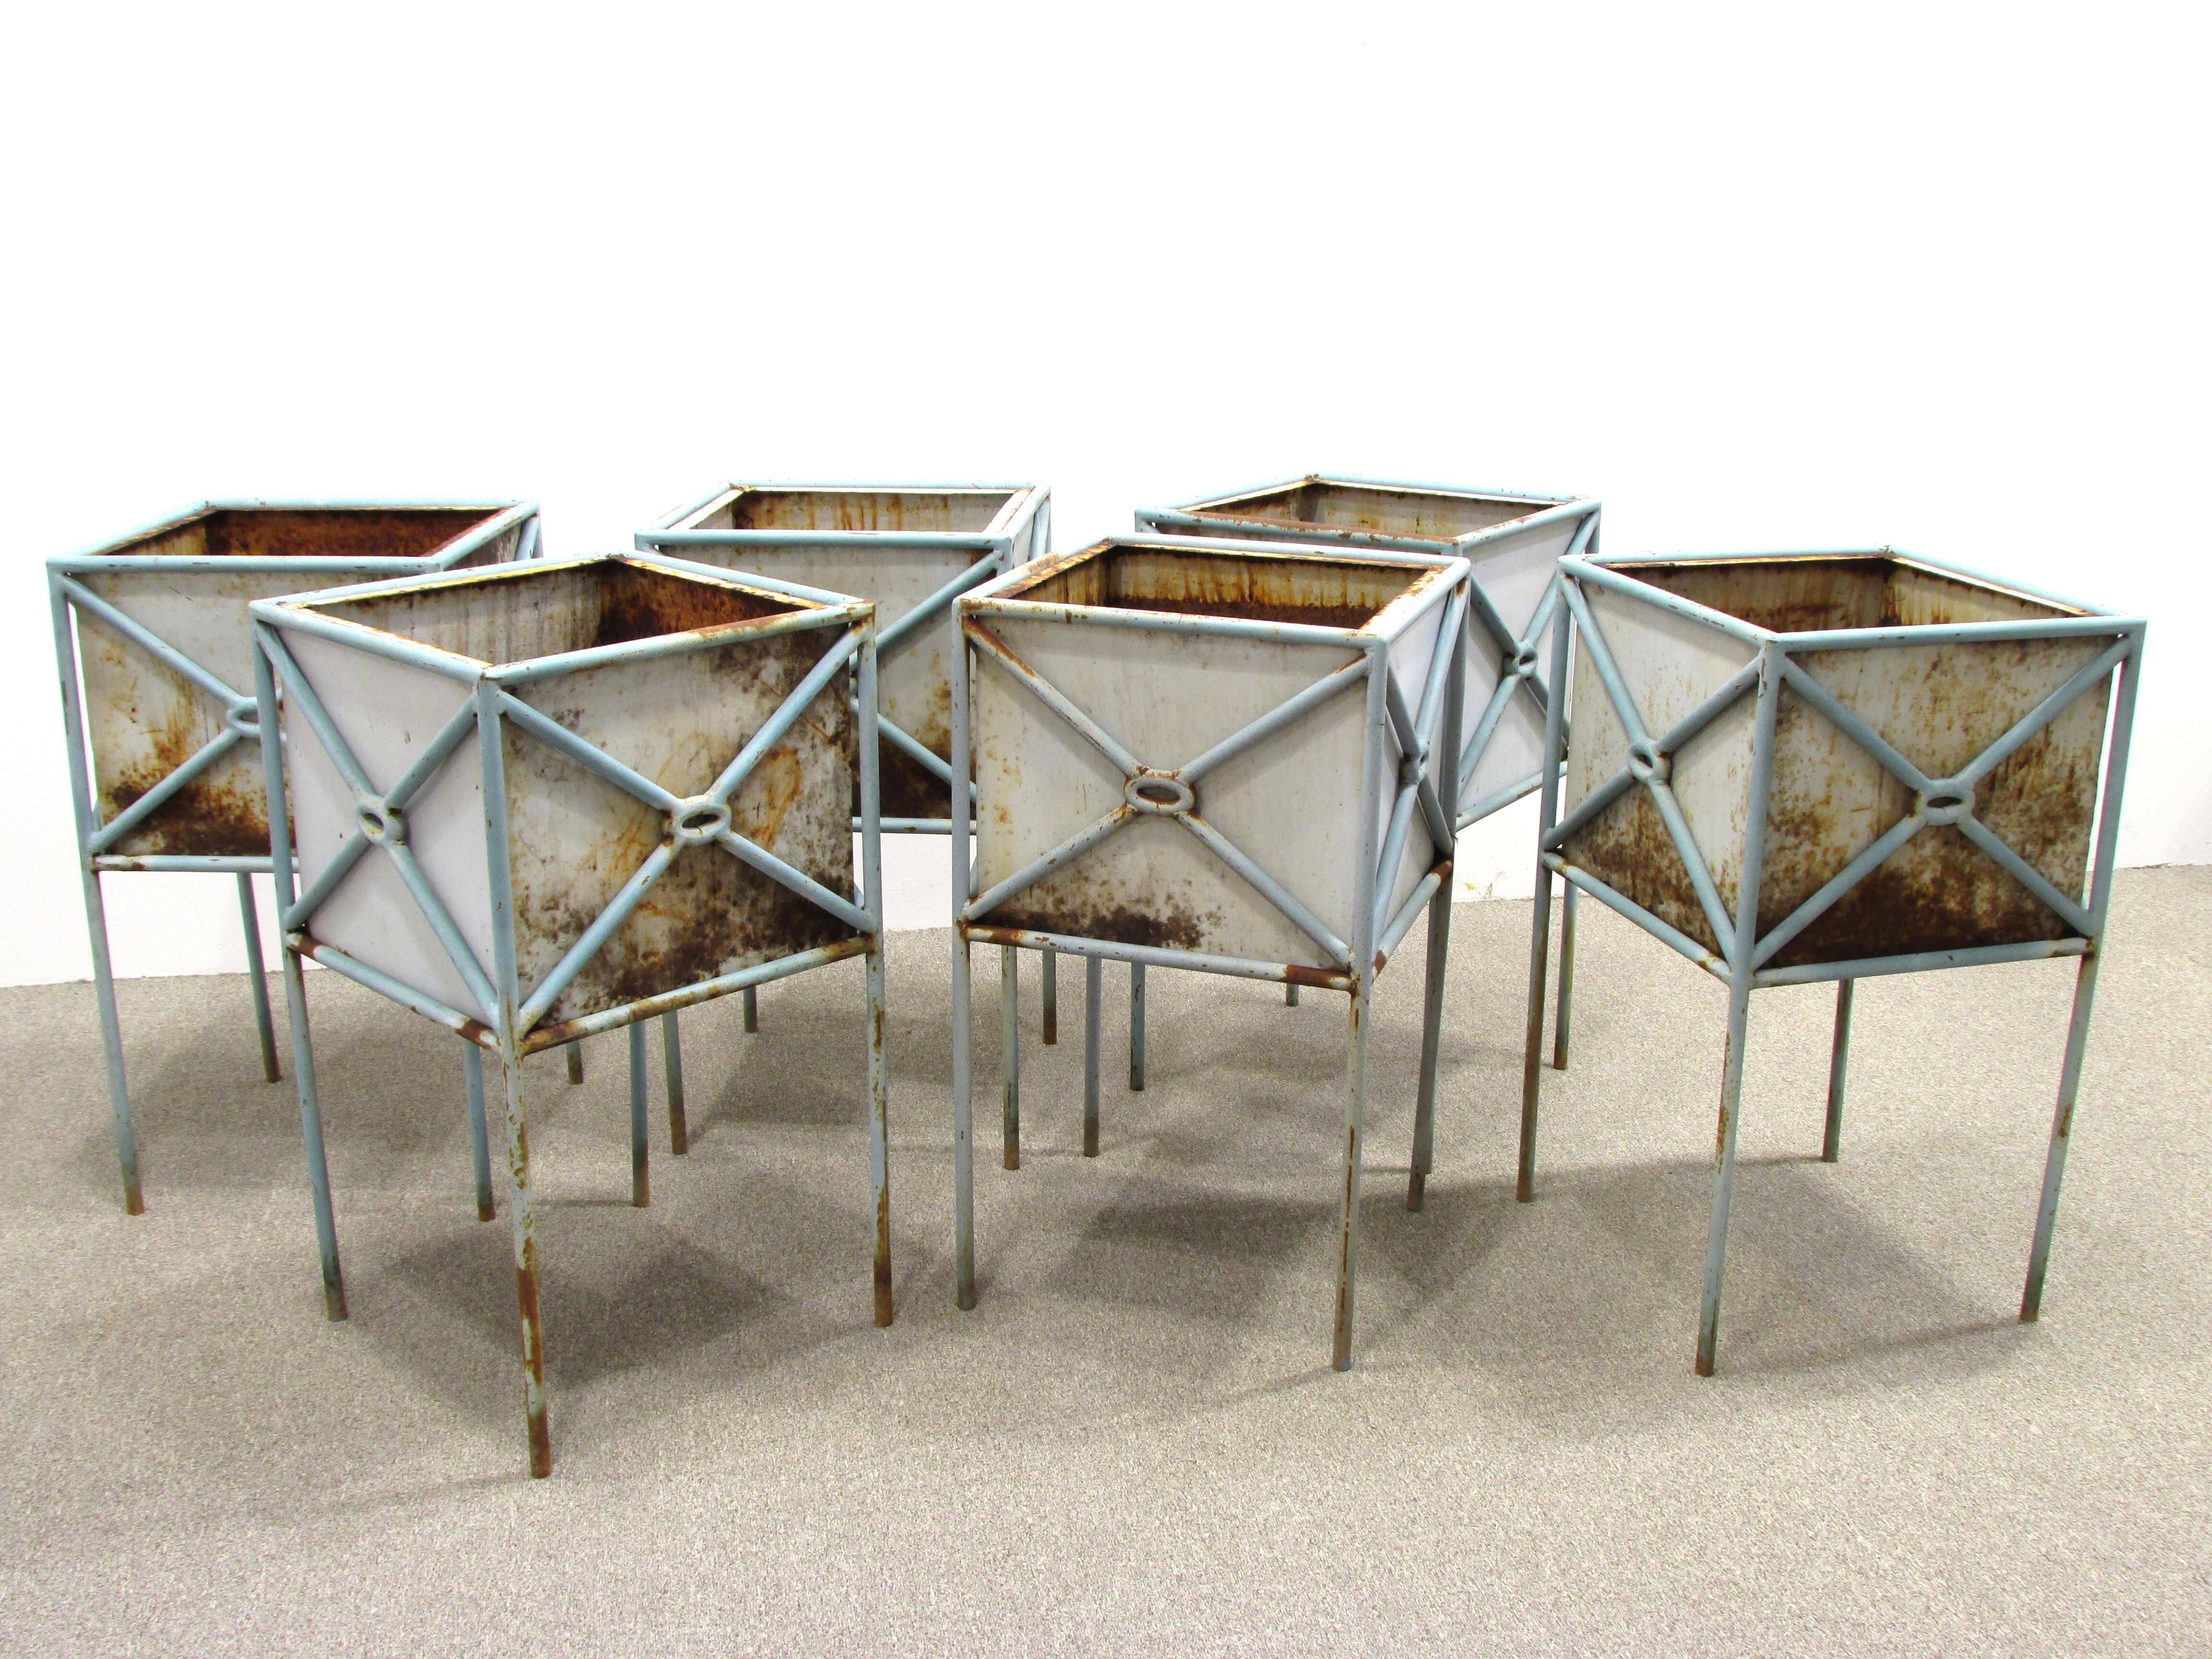 Set of six custom-made planter boxes from the 1980s. Site designed by architect for around a pool in McLean Virginia. Inner box inserts into stand.